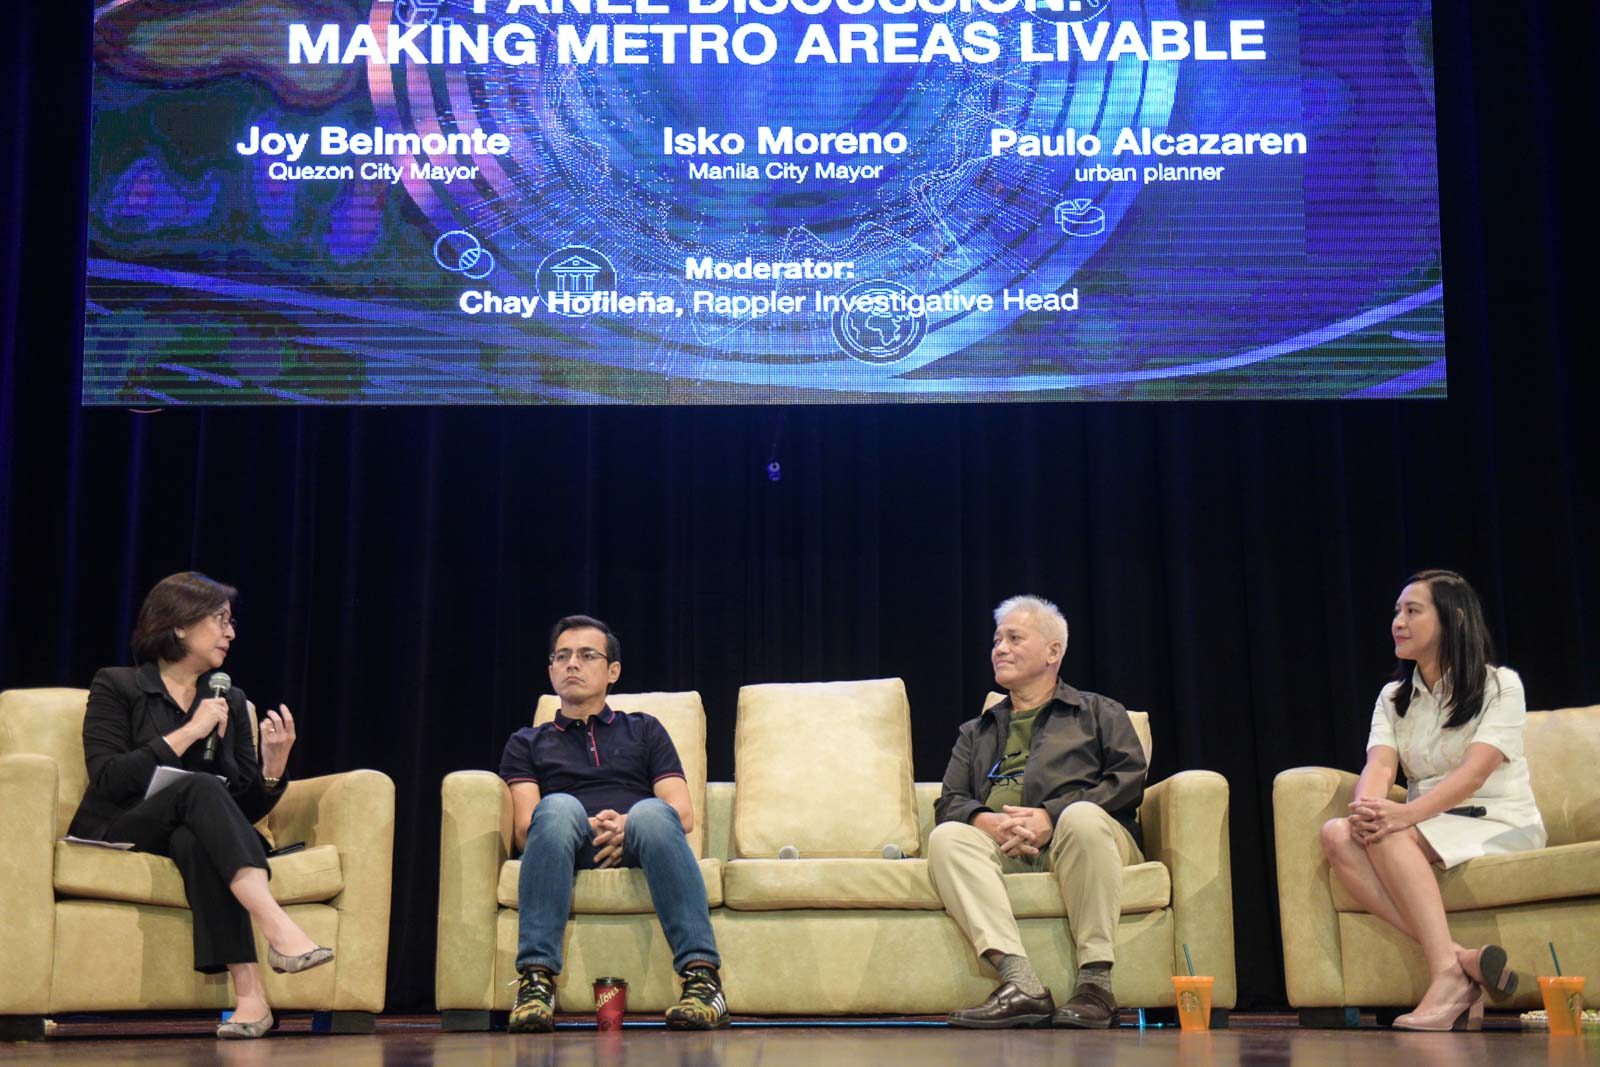 LIFE IN THE METRO: Manila Mayor Isko Moreno (second from left) and Quezon City Mayor Joy Belmonte (right) talk about how to make Metro Manila more livable at the 2019 Social Good Summit on Saturday, September 21. Photo by LeAnne Jazul/Rappler
   